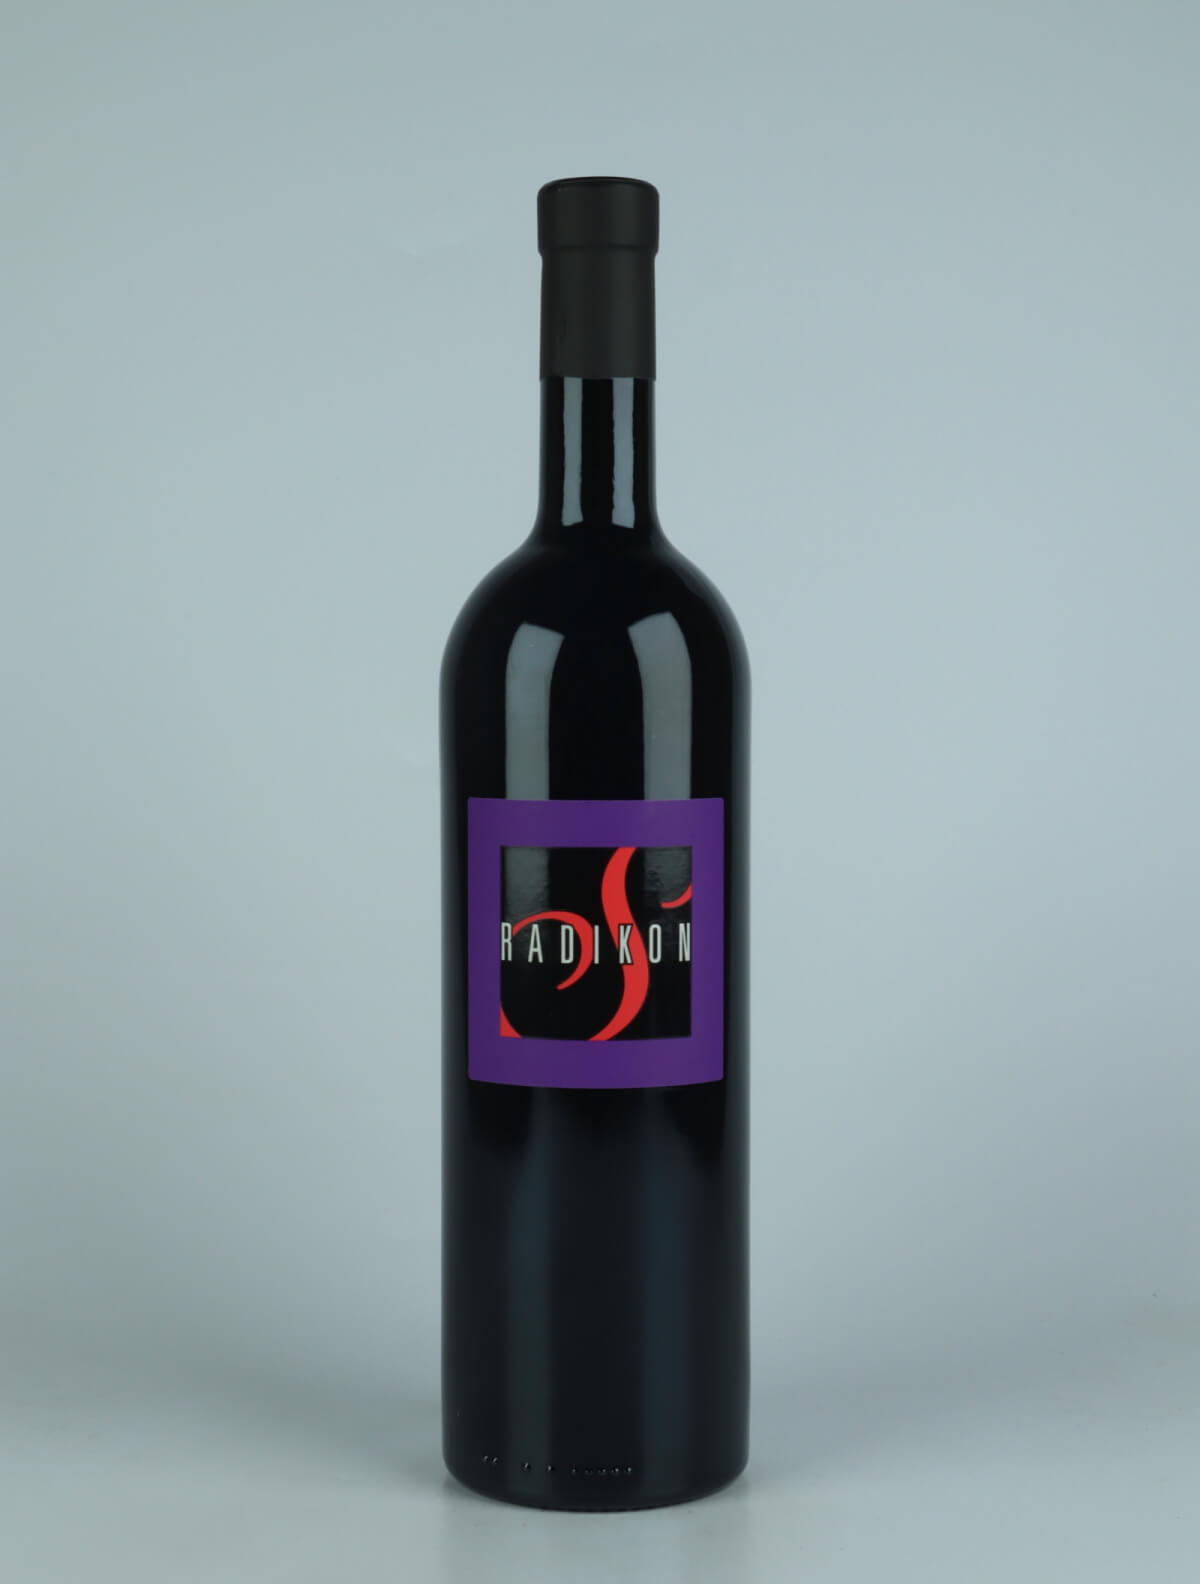 A bottle 2021 RS21 Red wine from Radikon, Friuli in Italy